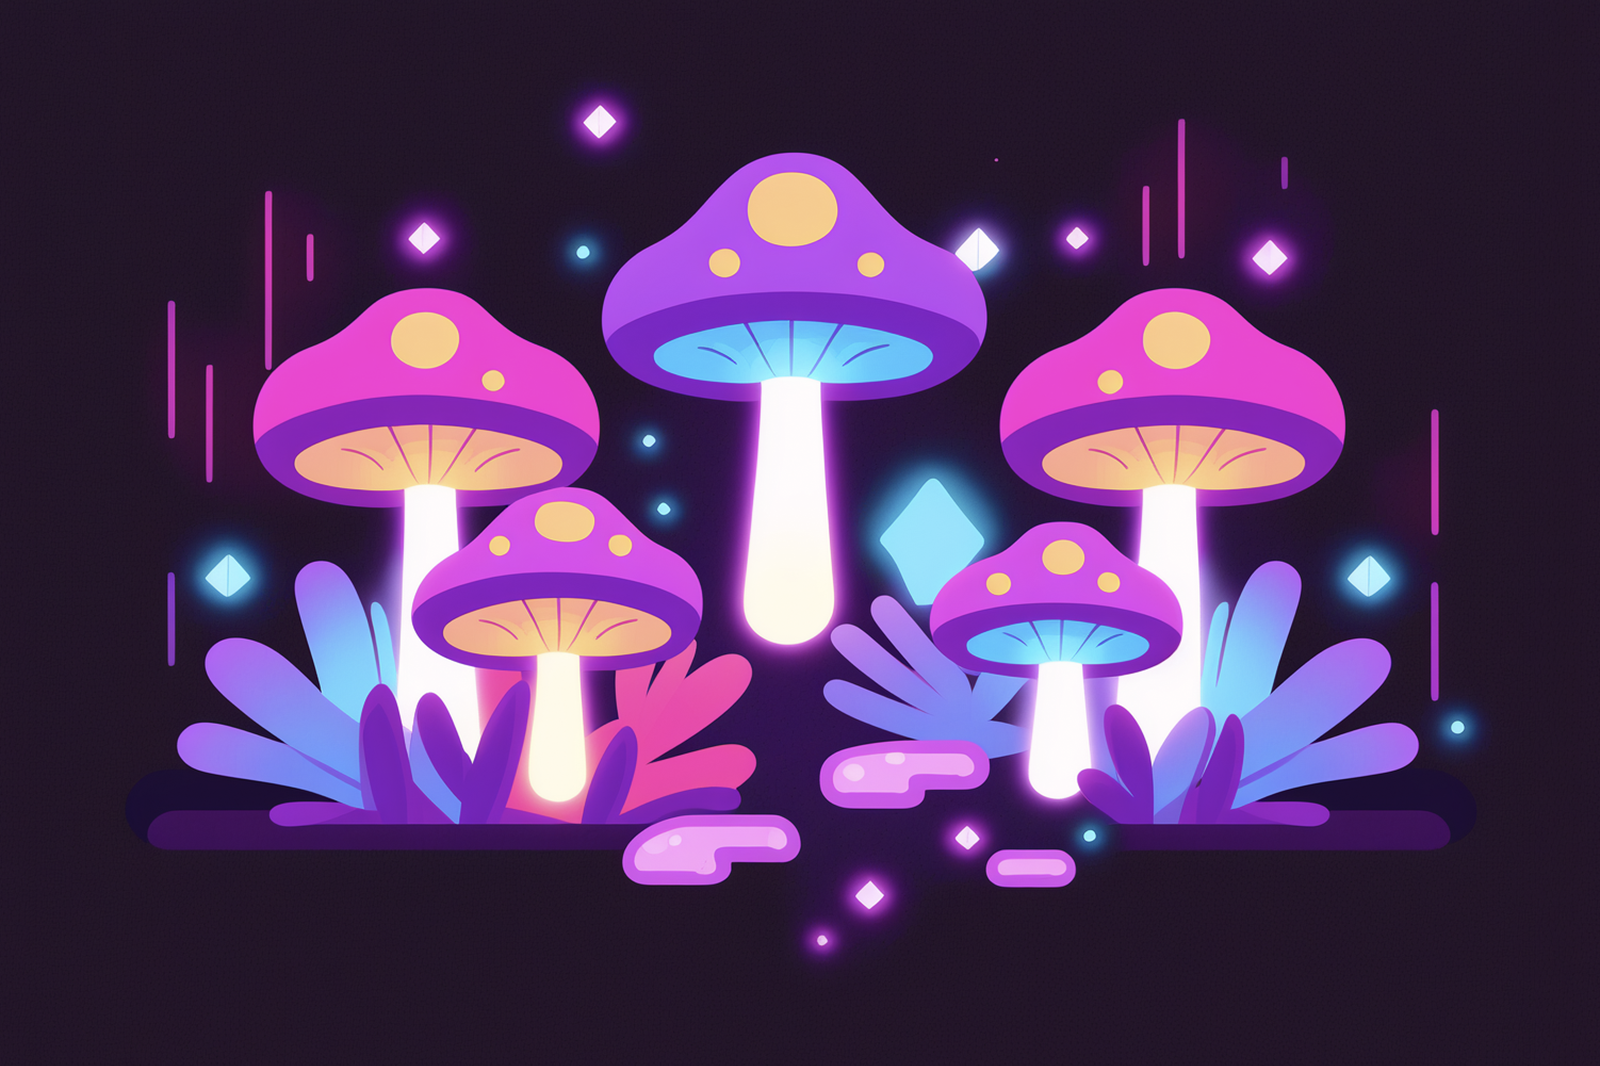 Multicolor, illustrated, illuminated mushrooms with bushes against a dark violet backdrop